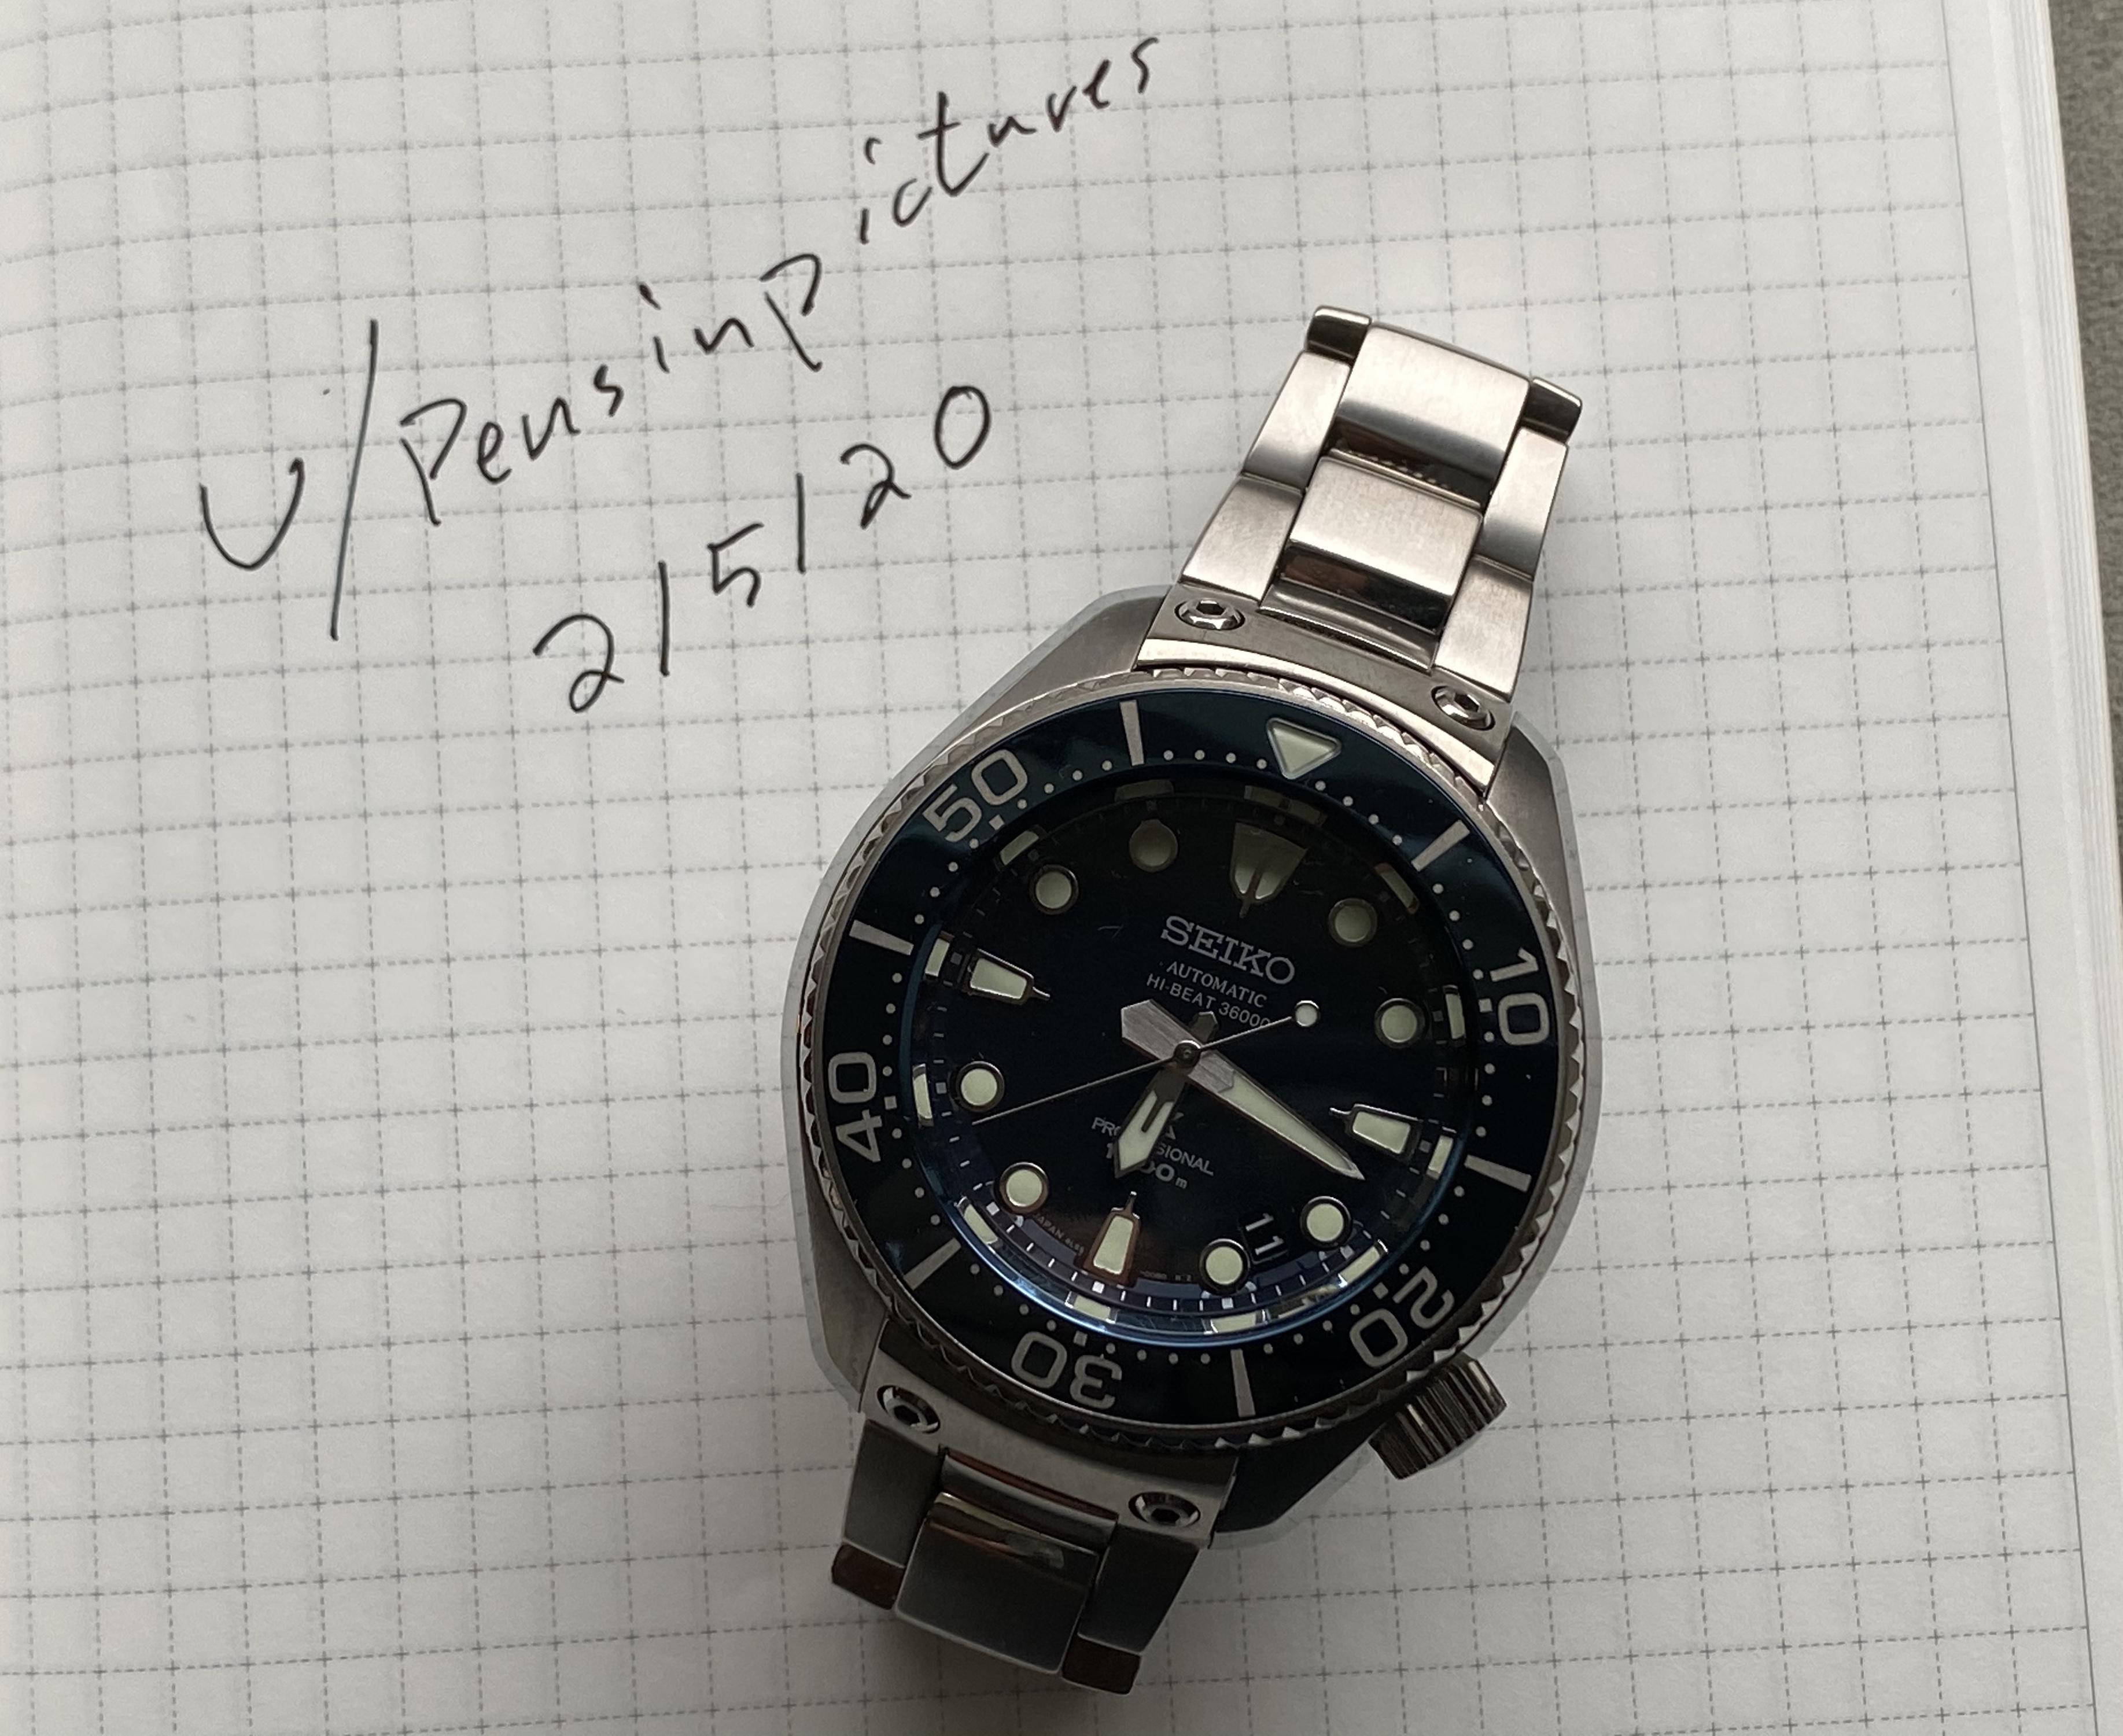 WTS] Seiko Prospex SBEX005 Hi-Beat with box and papers | WatchCharts